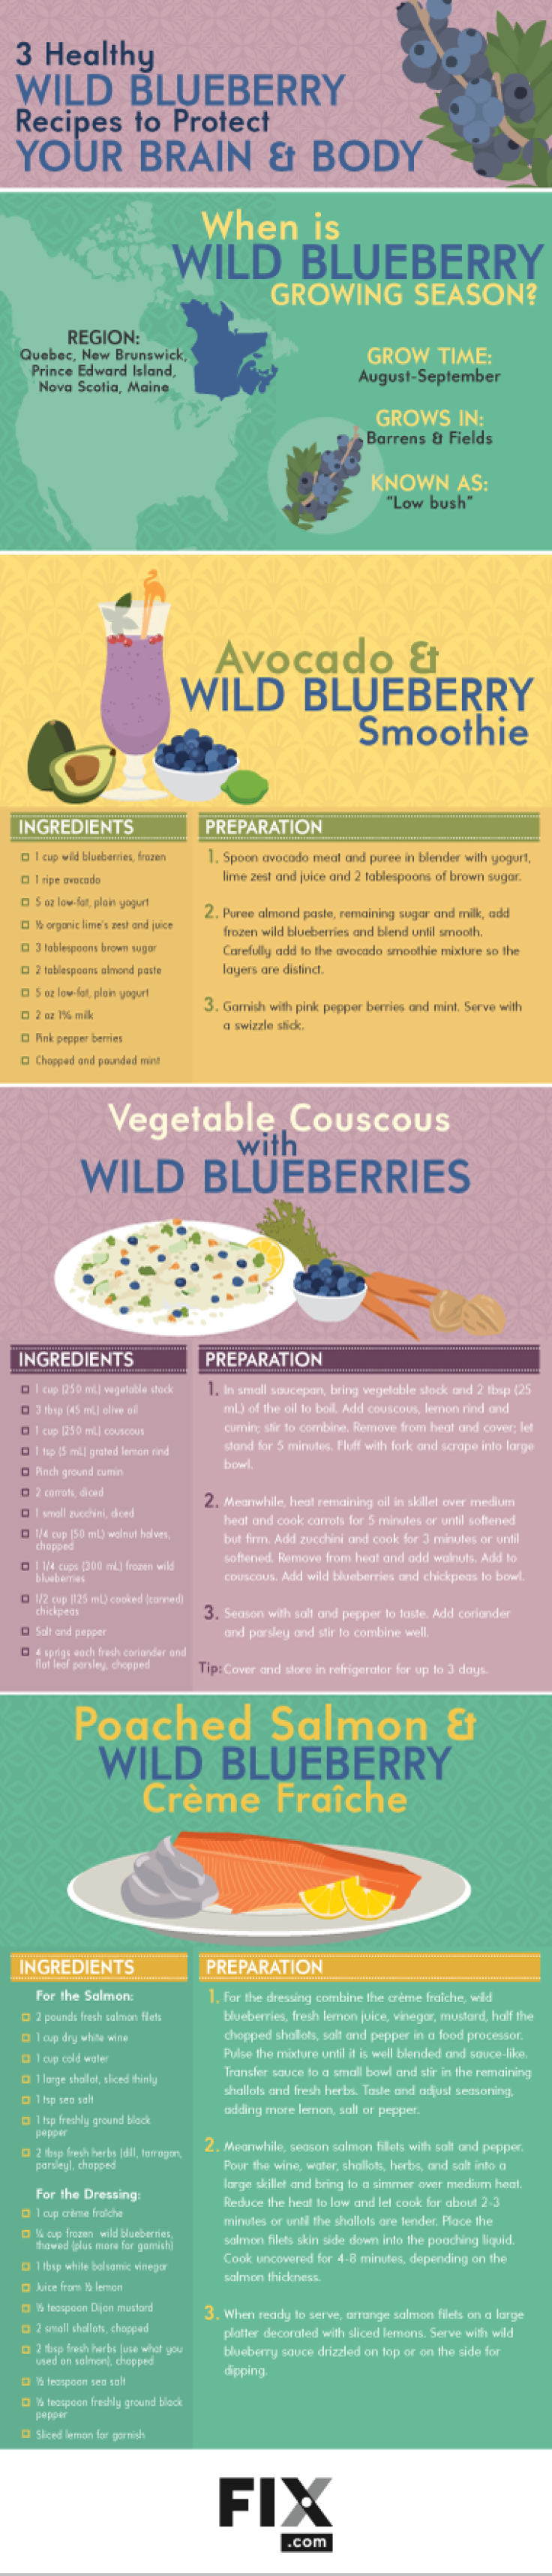 wild-blueberry-recipes-embed-small